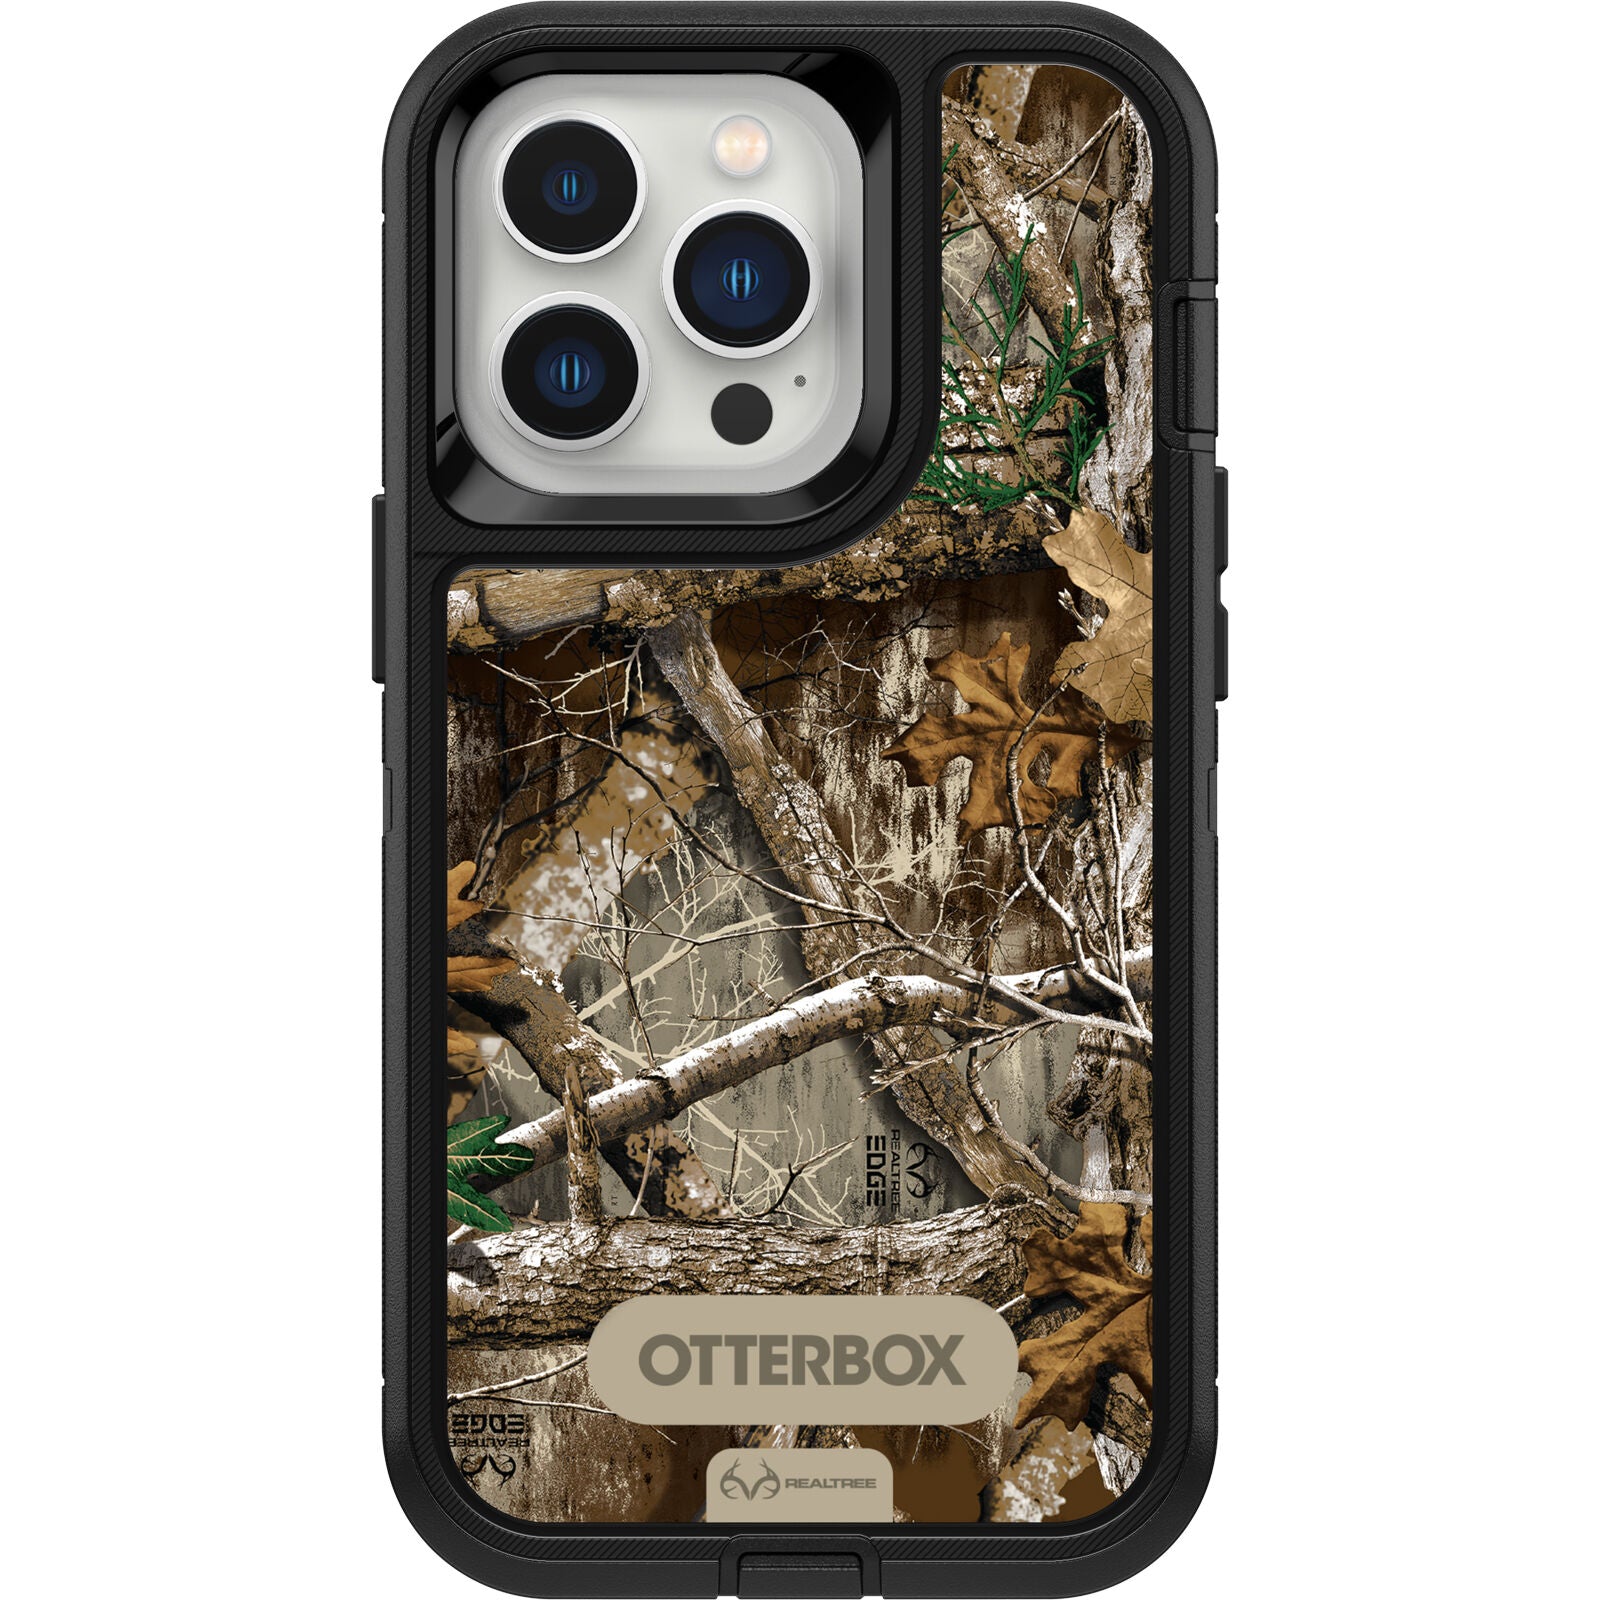 OtterBox DEFENDER SERIES Case for Apple iPhone 13 Pro - RealTree Edge Black (Certified Refurbished)